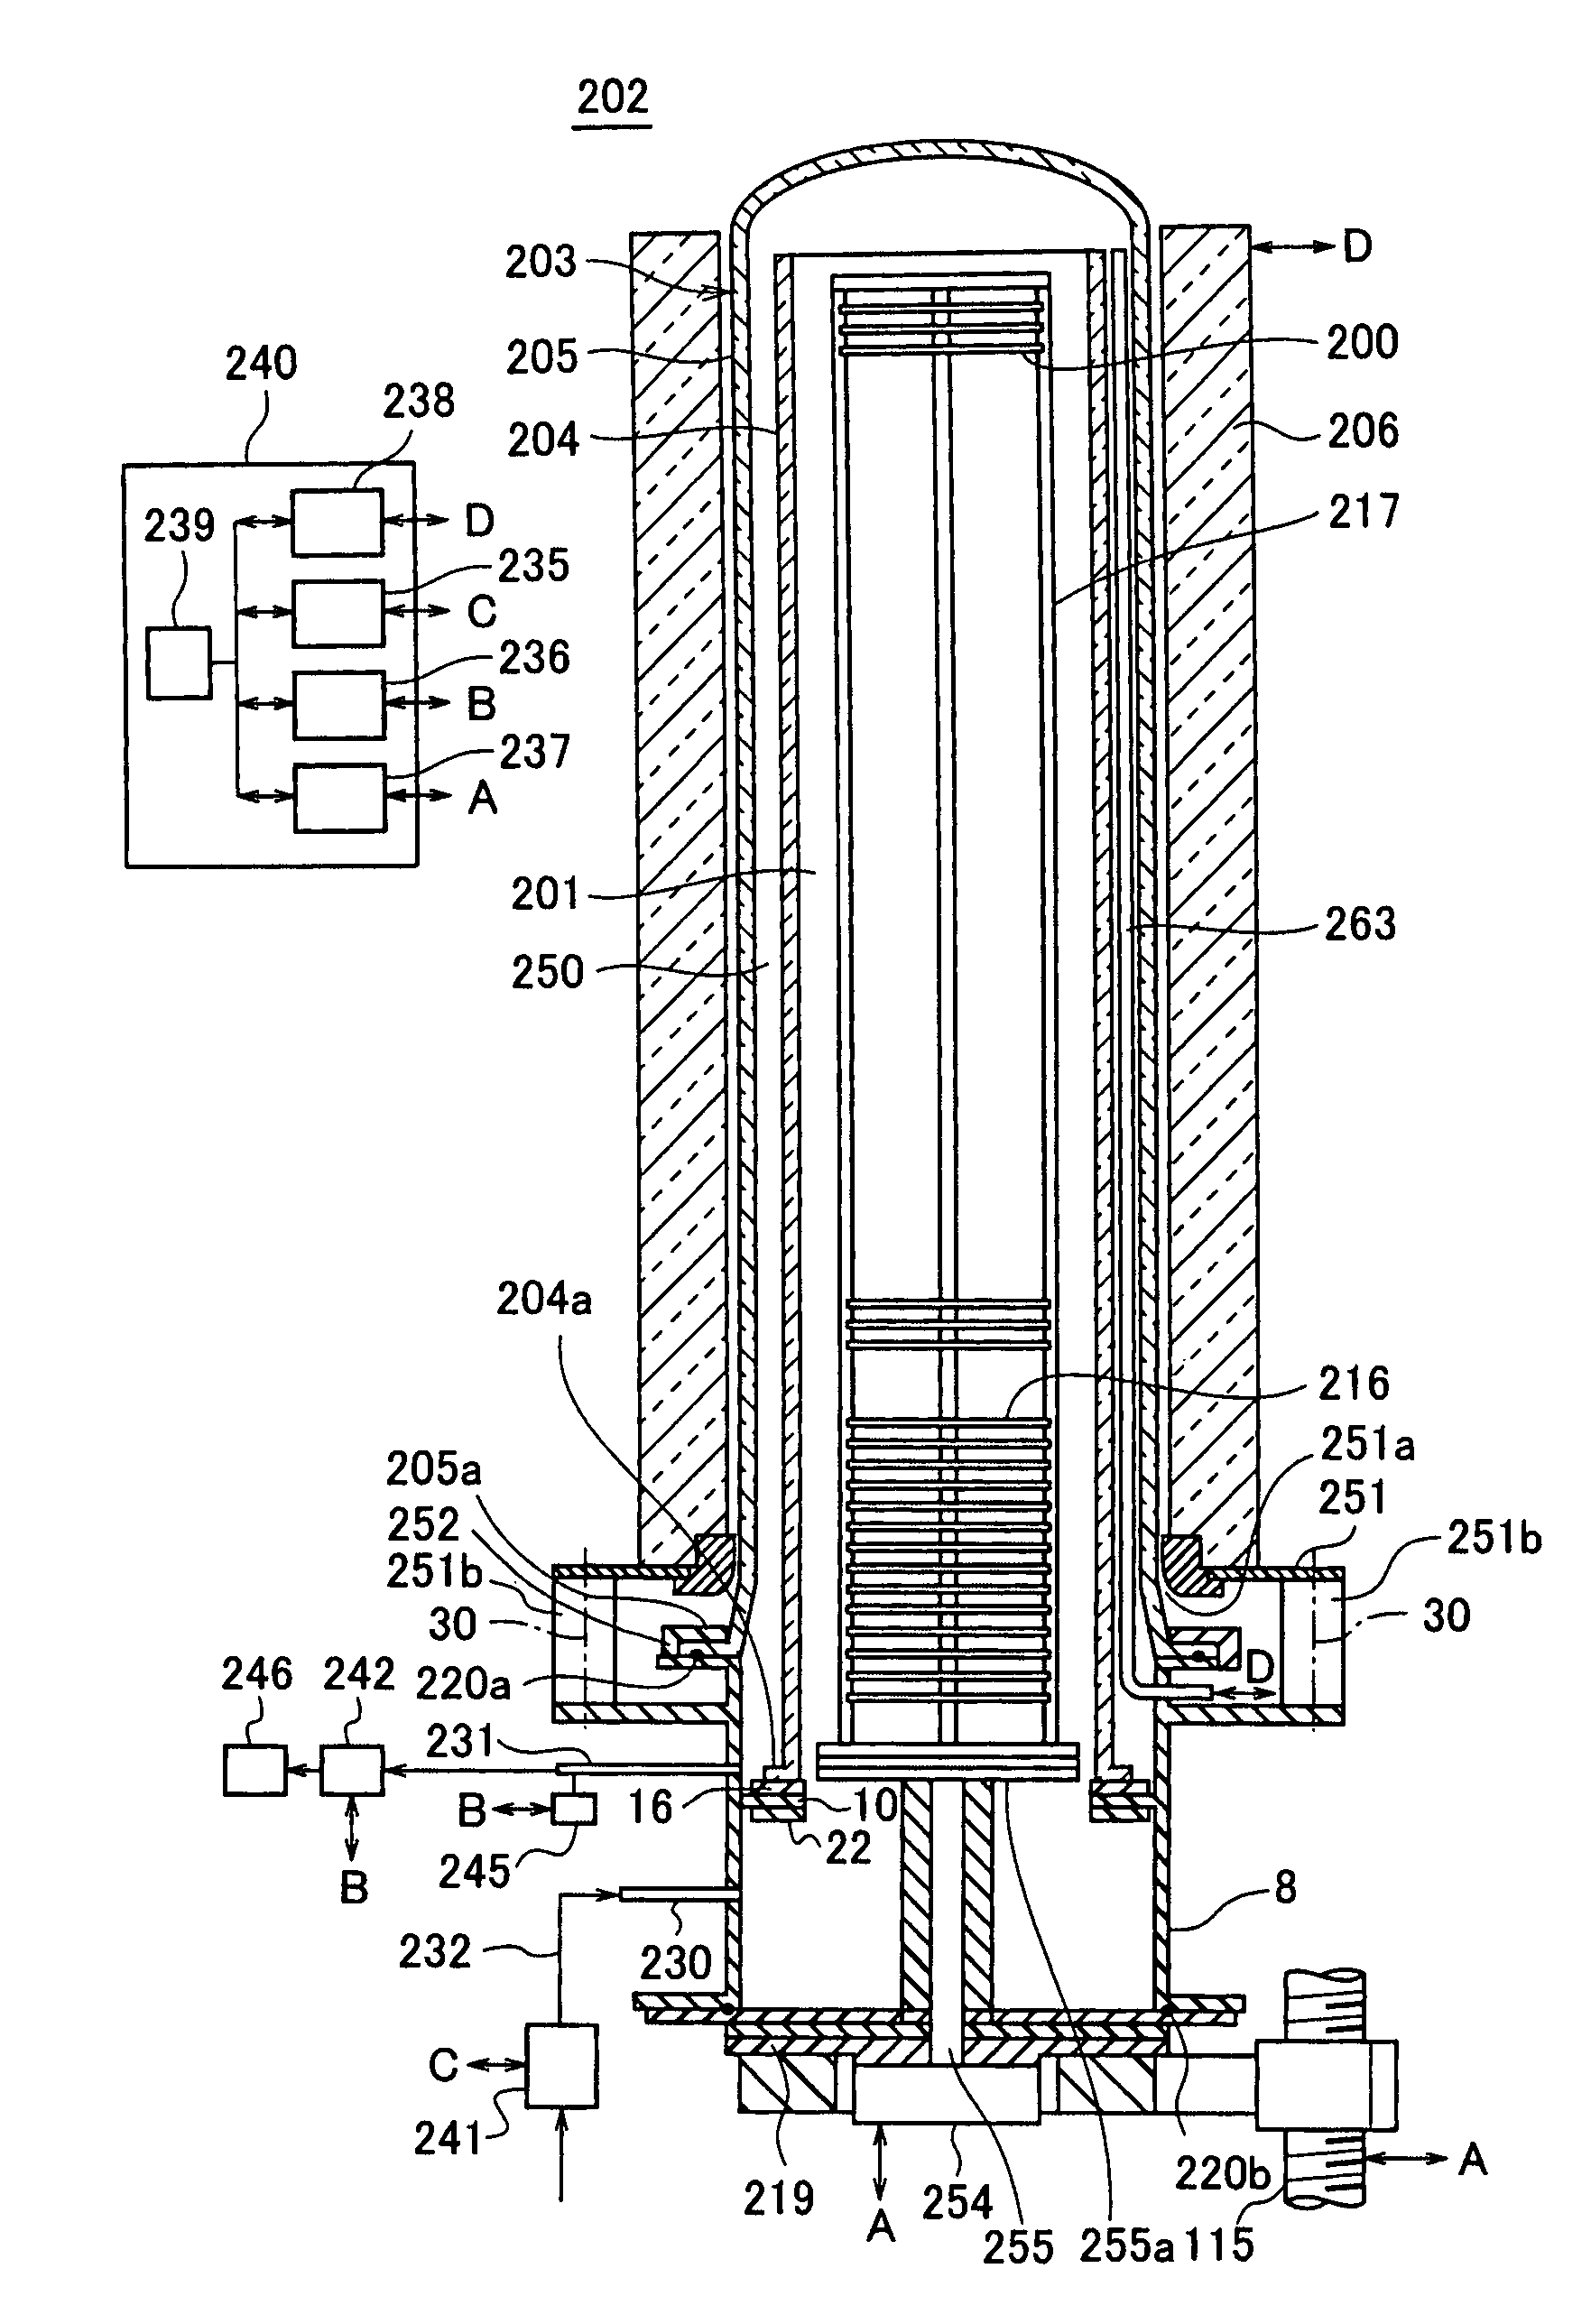 Substrate processing apparatus, method of manufacturing a semiconductor device, and method of forming a thin film on metal surface